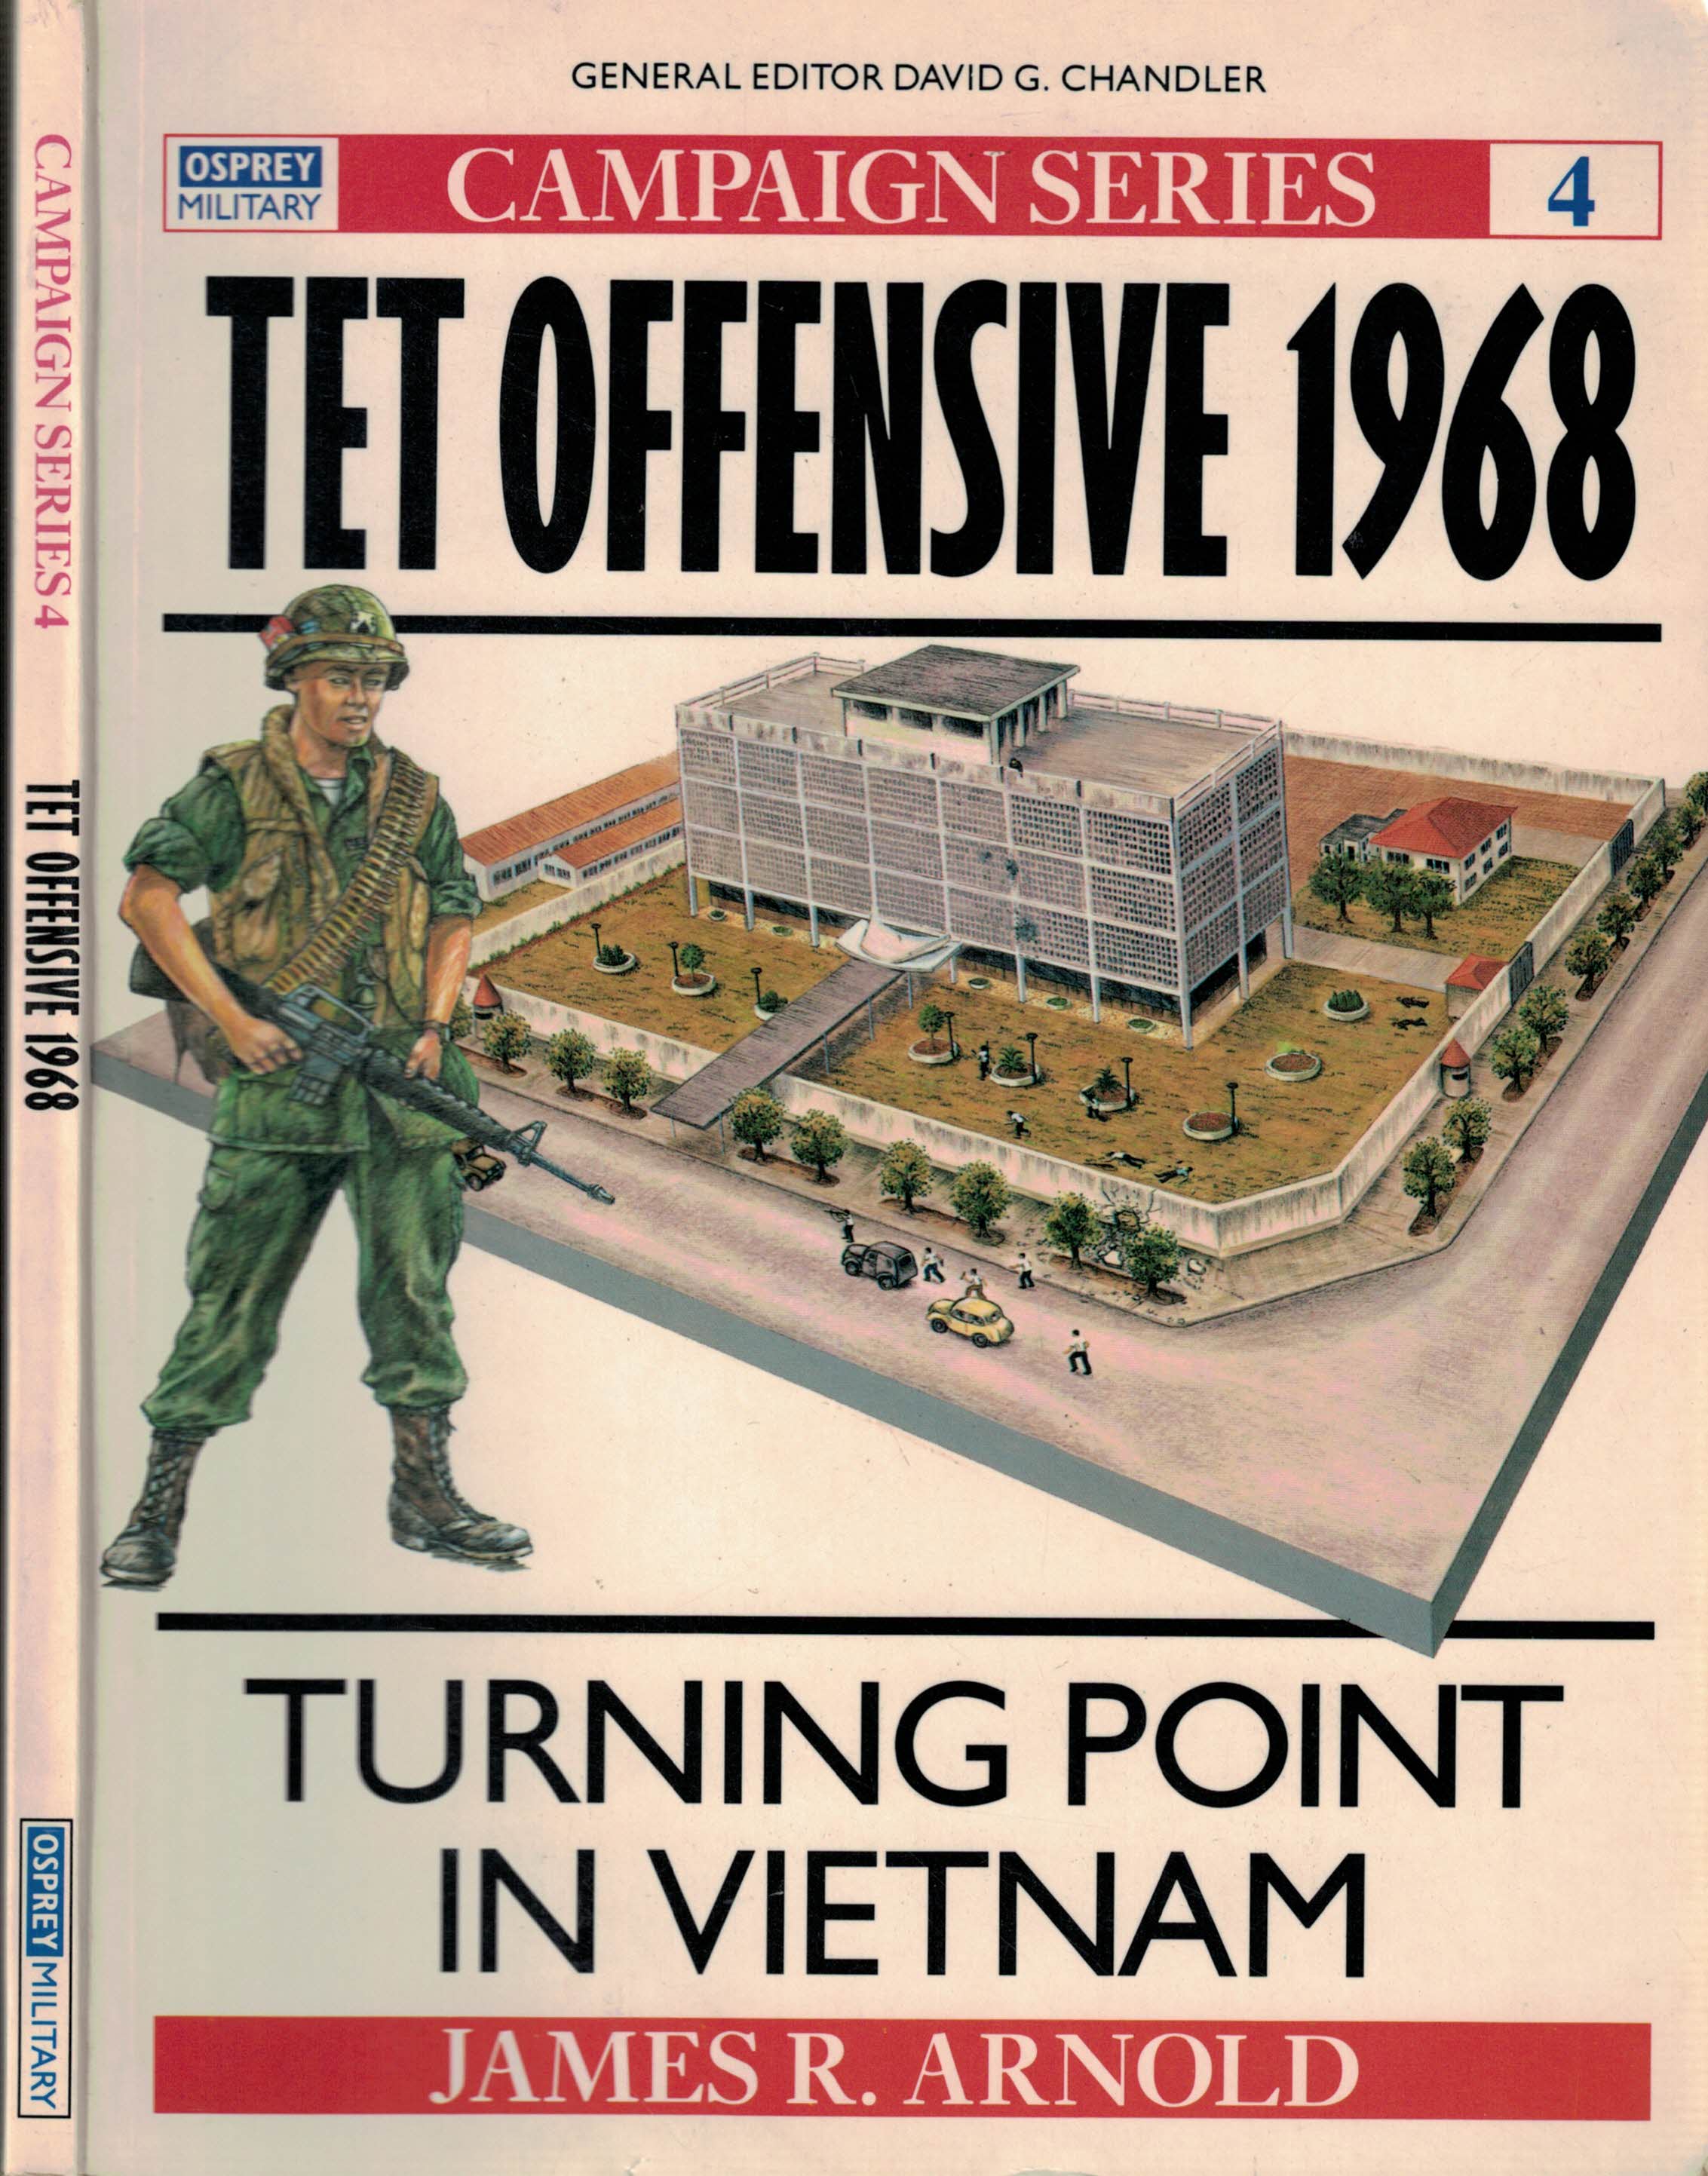 Tet Offensive 1968. Turning Point in Vietnam. Campaign series No. 4.